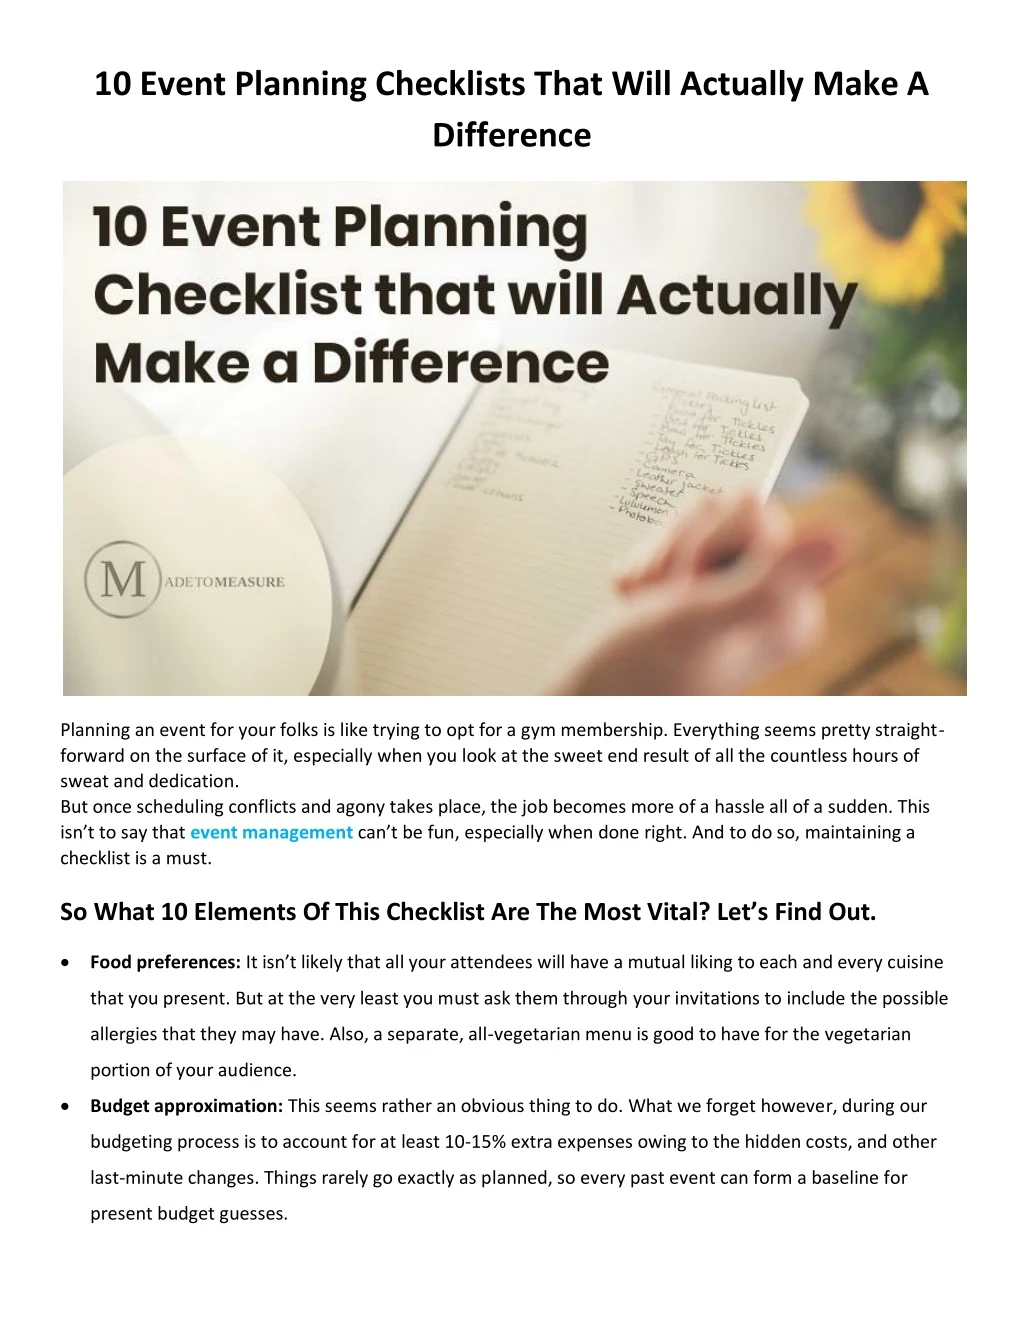 10 event planning checklists that will actually